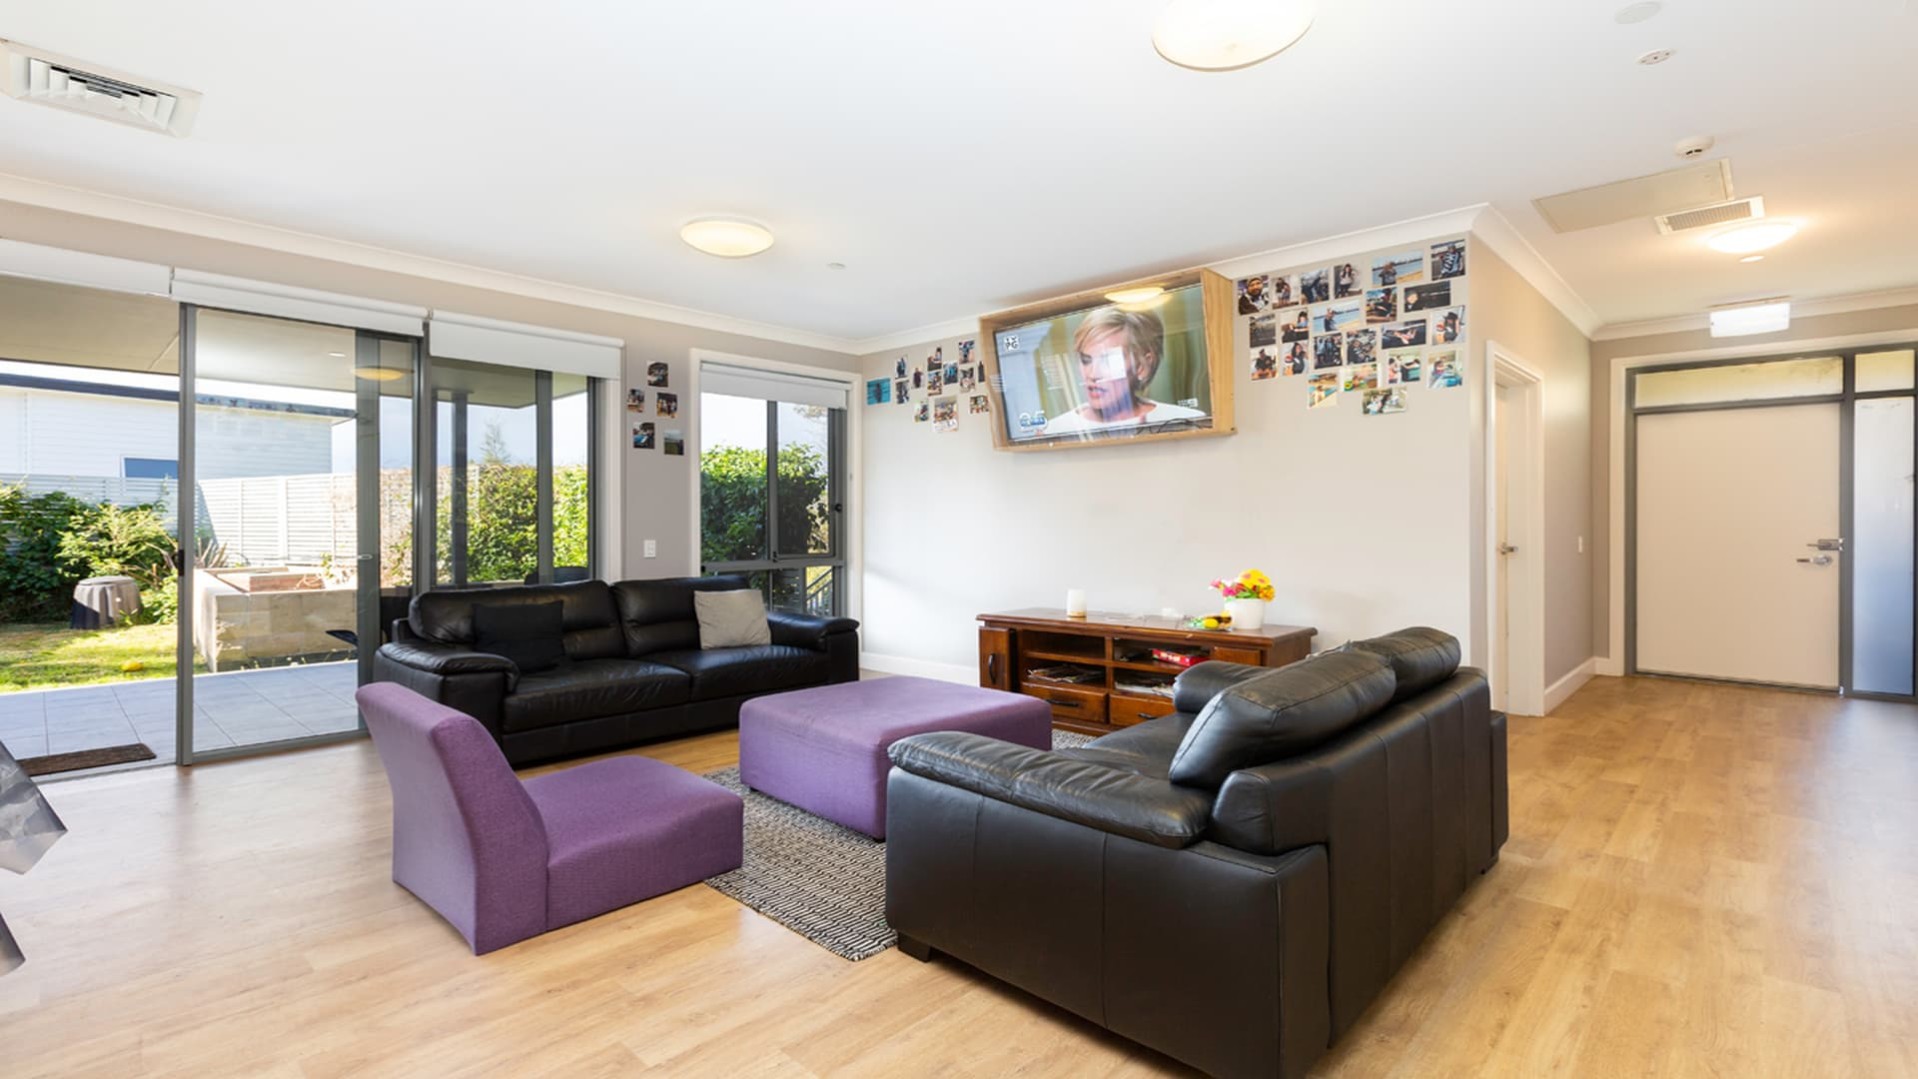 Spacious loungeroom with hard wood floors, a mix of purple and black lounge and chairs, opening out onto the undercover patio.  Wall mounted Television.
